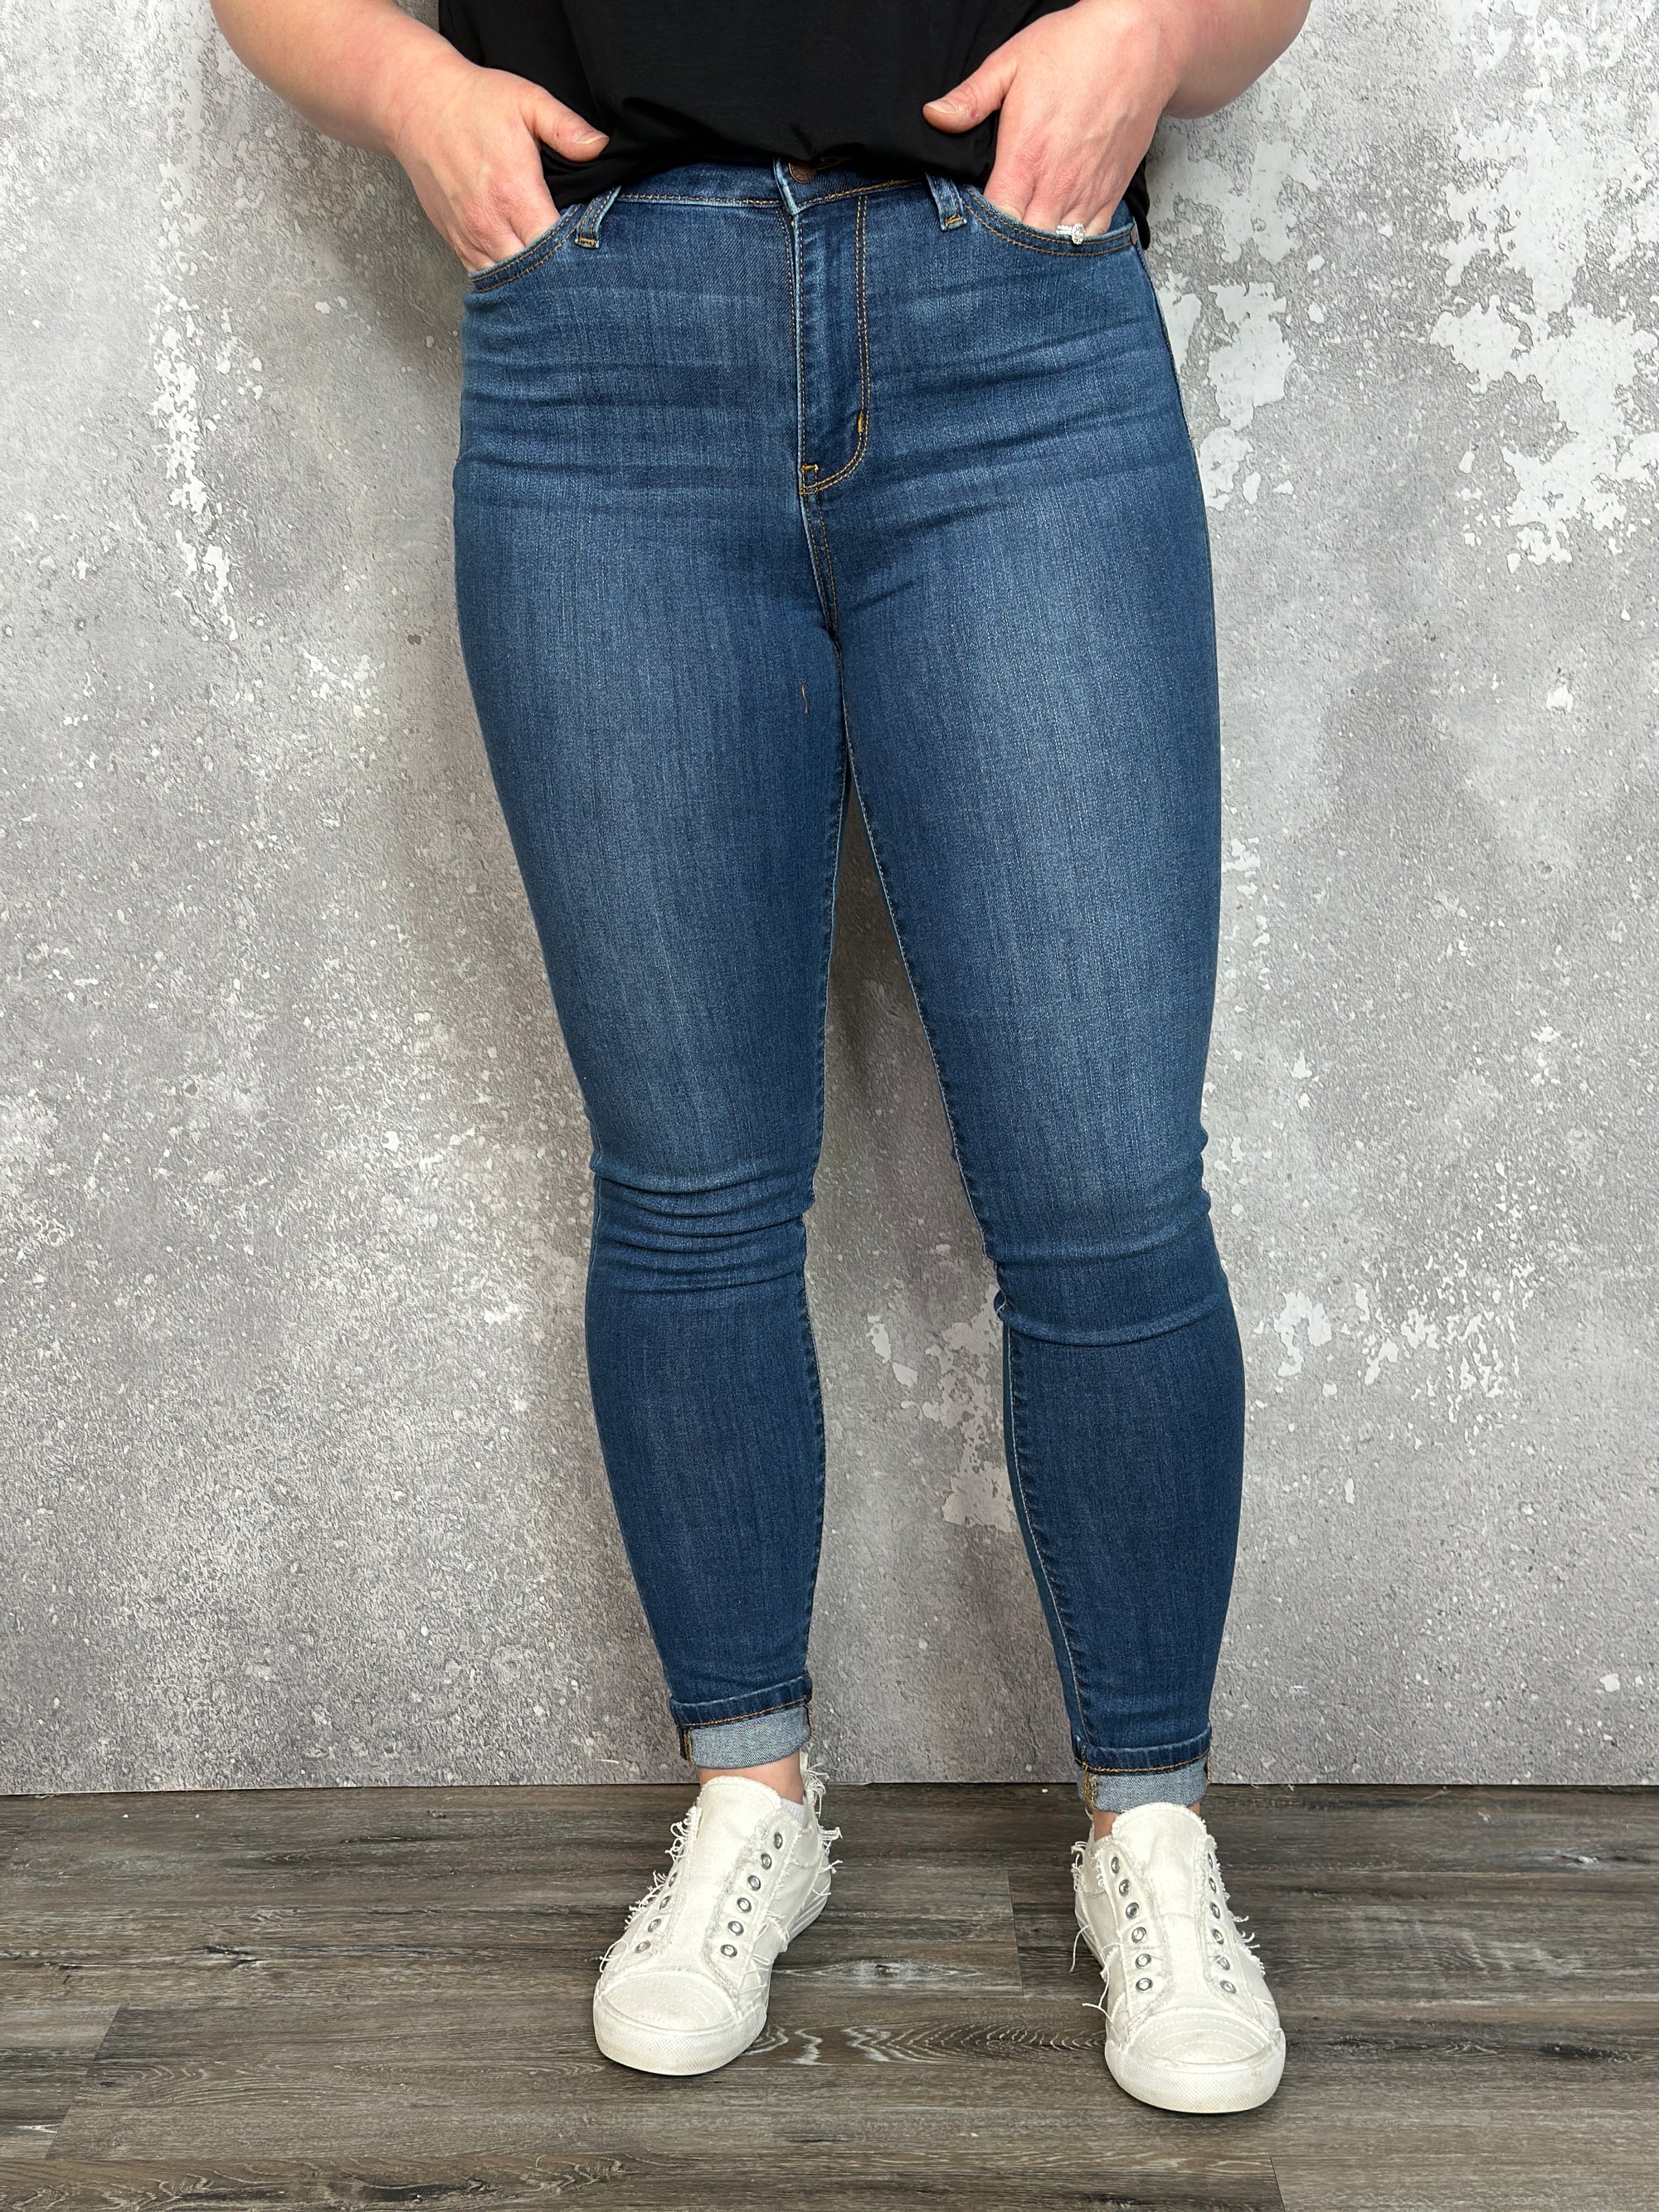 Judy Blue High Rise Skinny Fit Classic Jeans (sizes 0/24-24W)